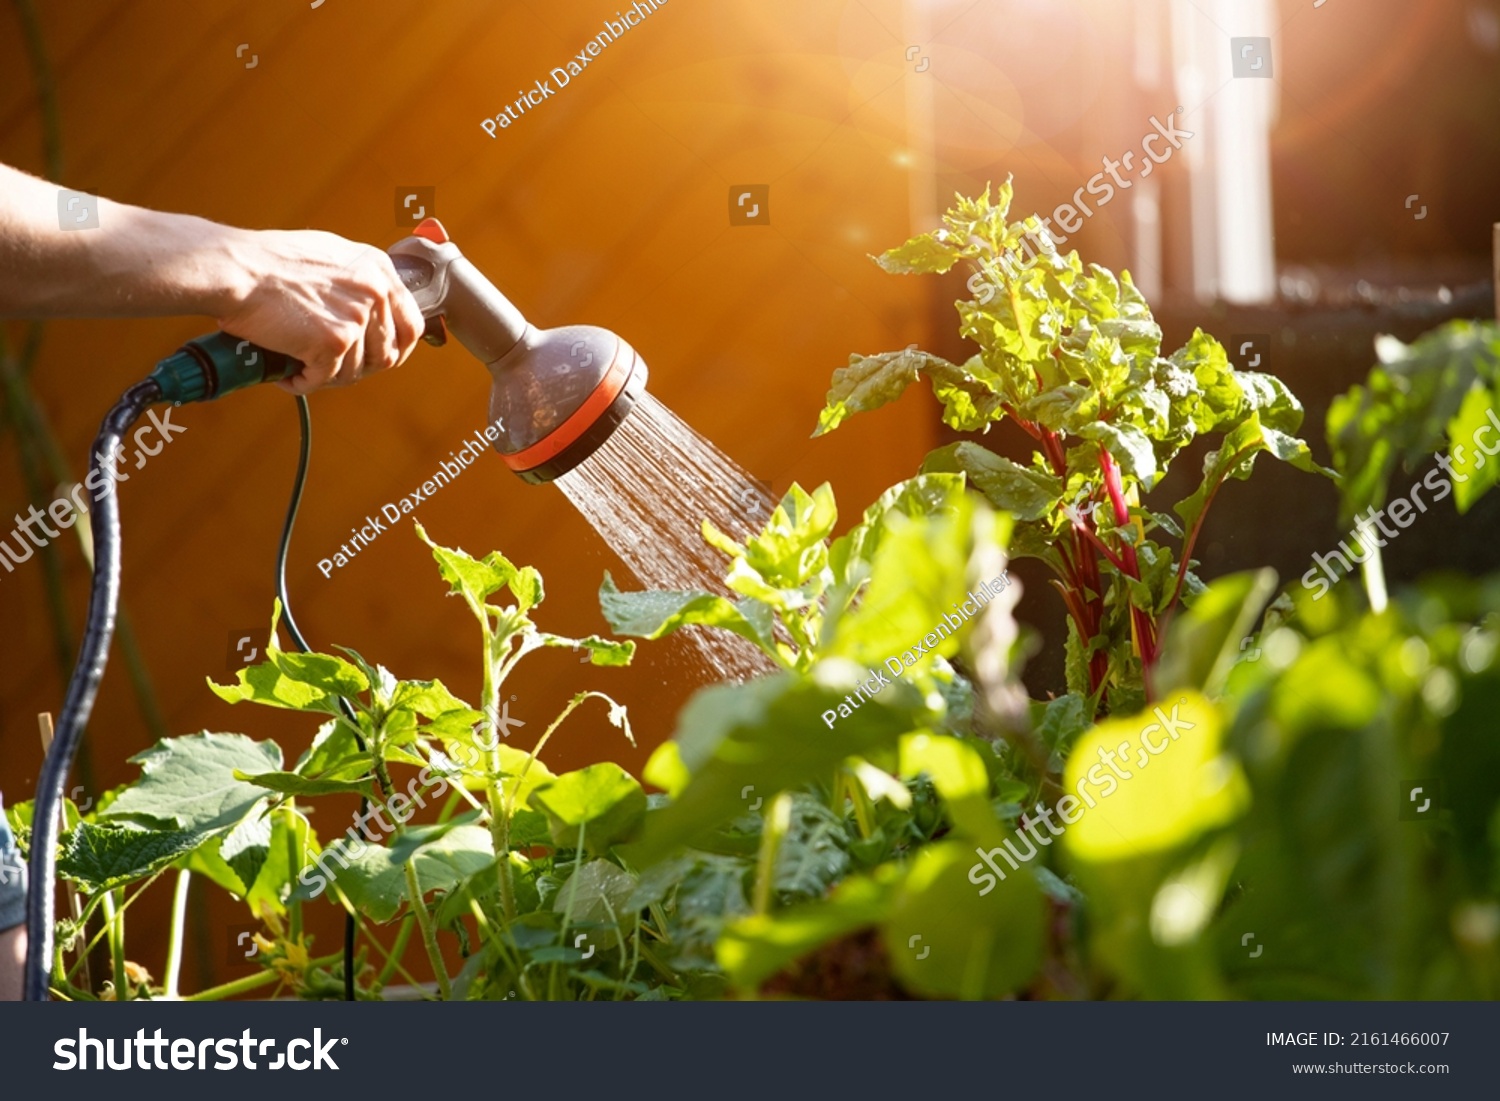 Urban gardening: Watering fresh vegetables and herbs on fruitful soil in the own garden, raised bed. #2161466007